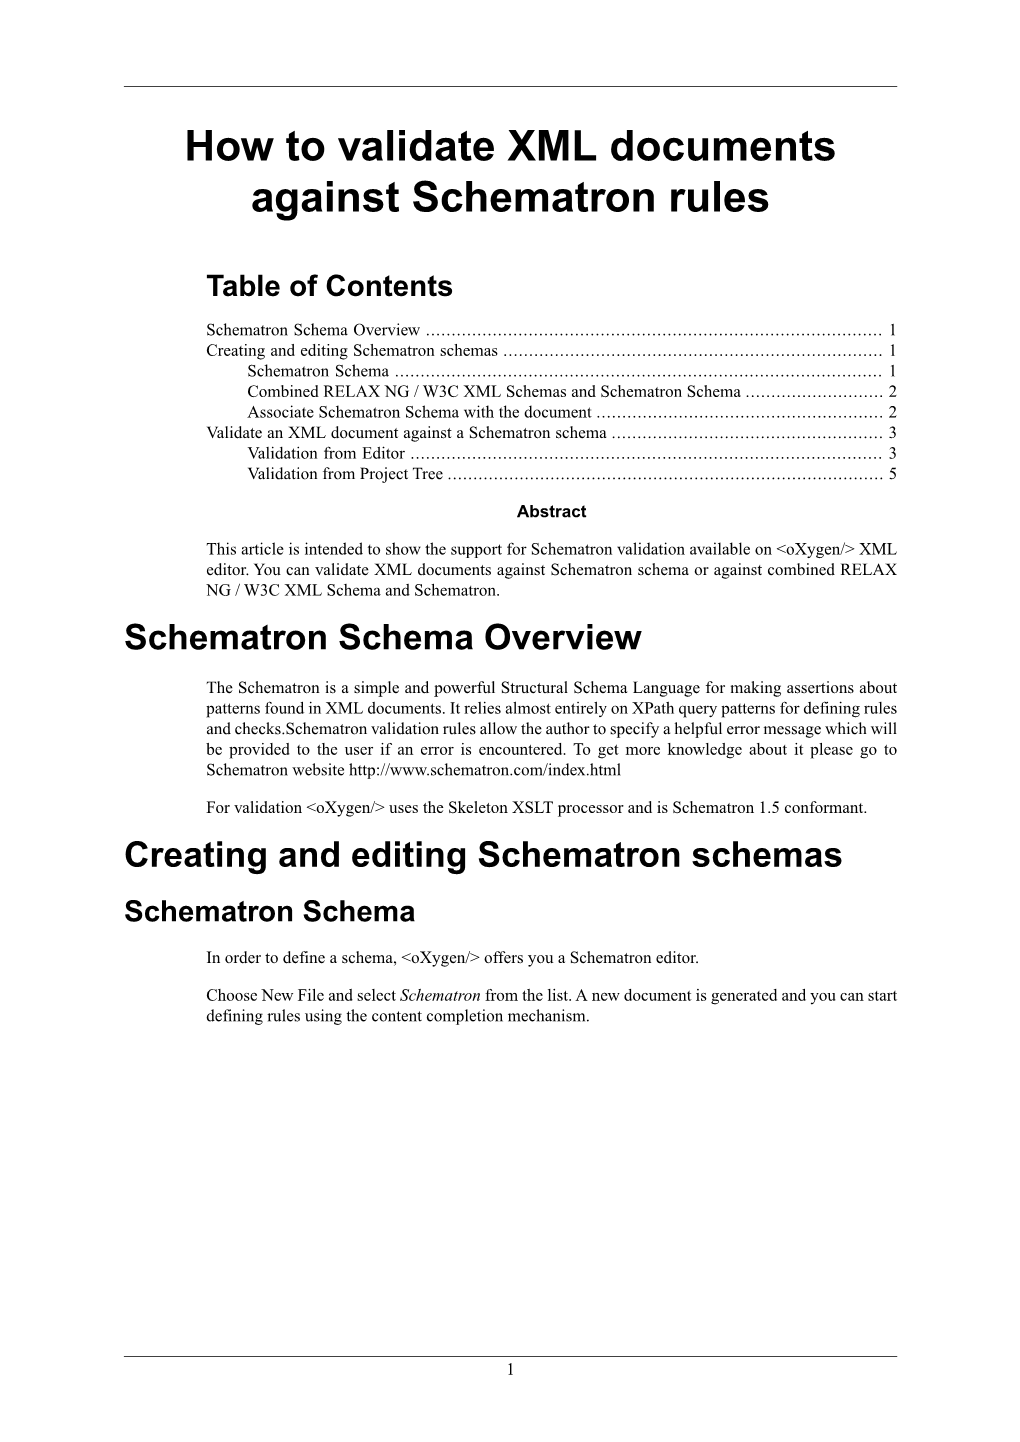 How to Validate XML Documents Against Schematron Rules